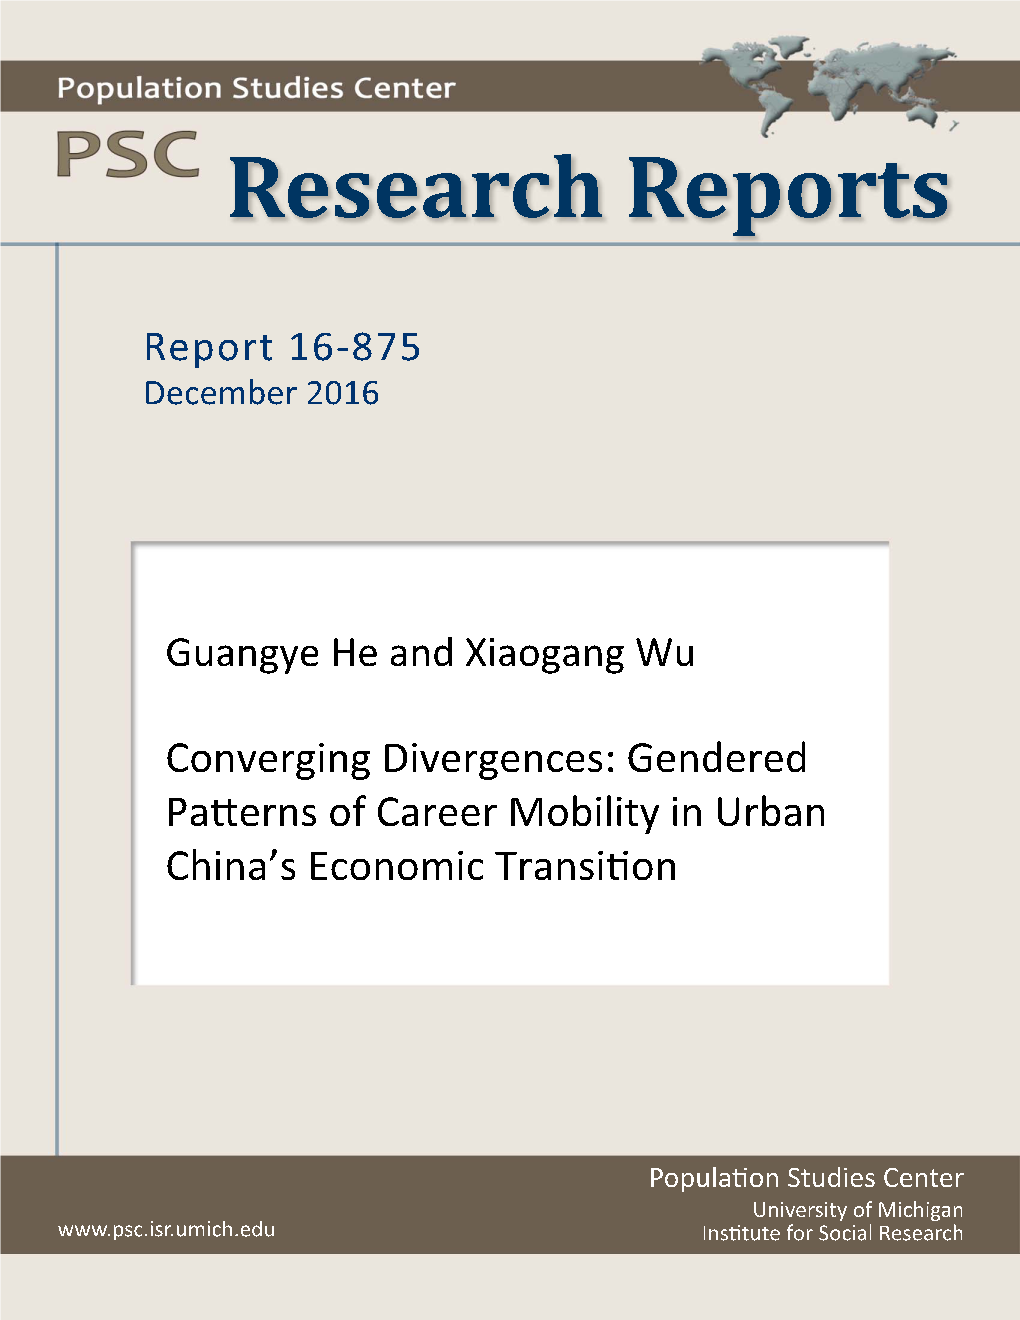 Gendered Patterns of Career Mobility in Urban China's Economic Transition